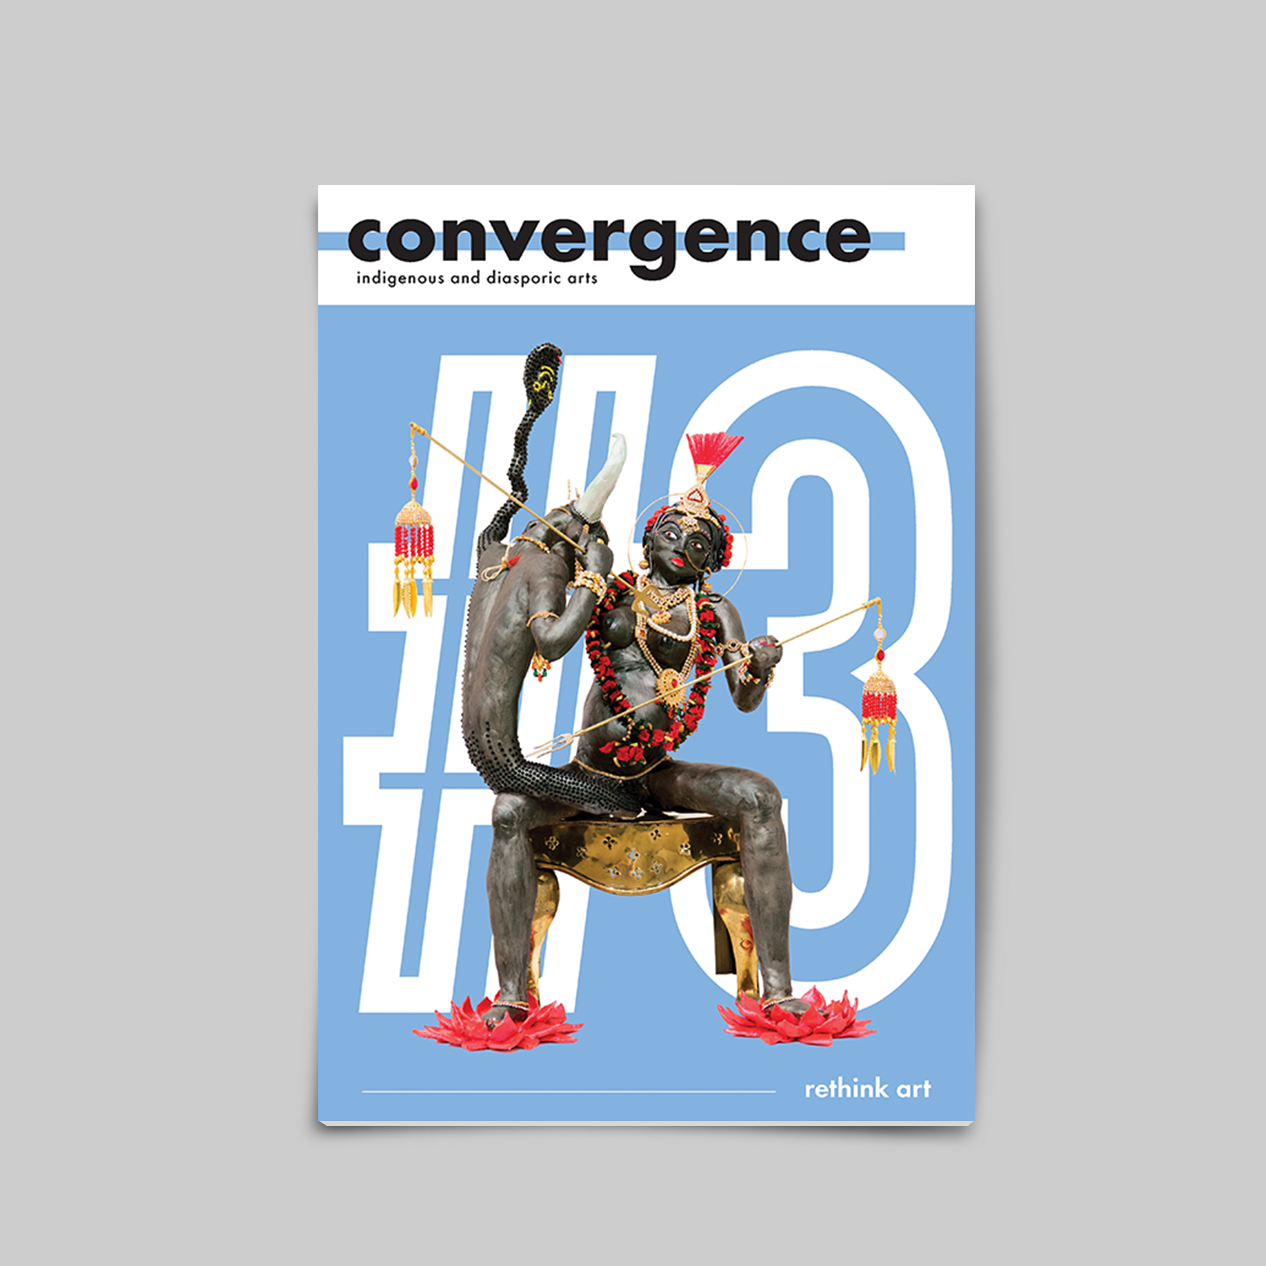 Mockup of the third issue of Convergence Magazine in English. "Endgame" by Jaishri Abichandani, a sculpture of a woman fighting a buffalo demon, is on the blue cover.